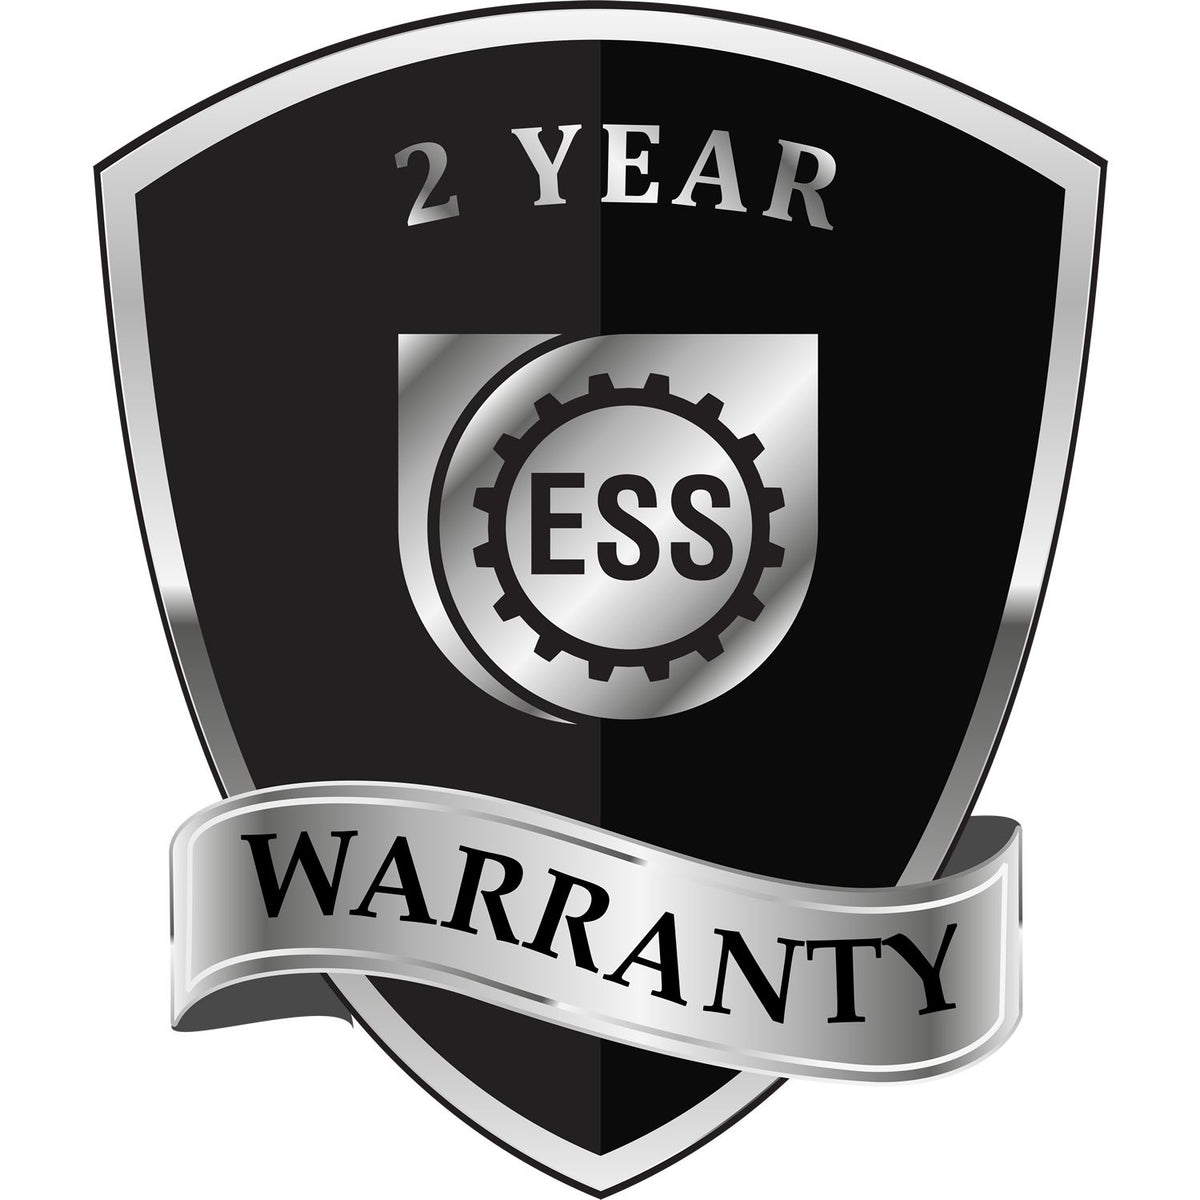 A black and silver badge or emblem showing warranty information for the Gift Vermont Landscape Architect Seal